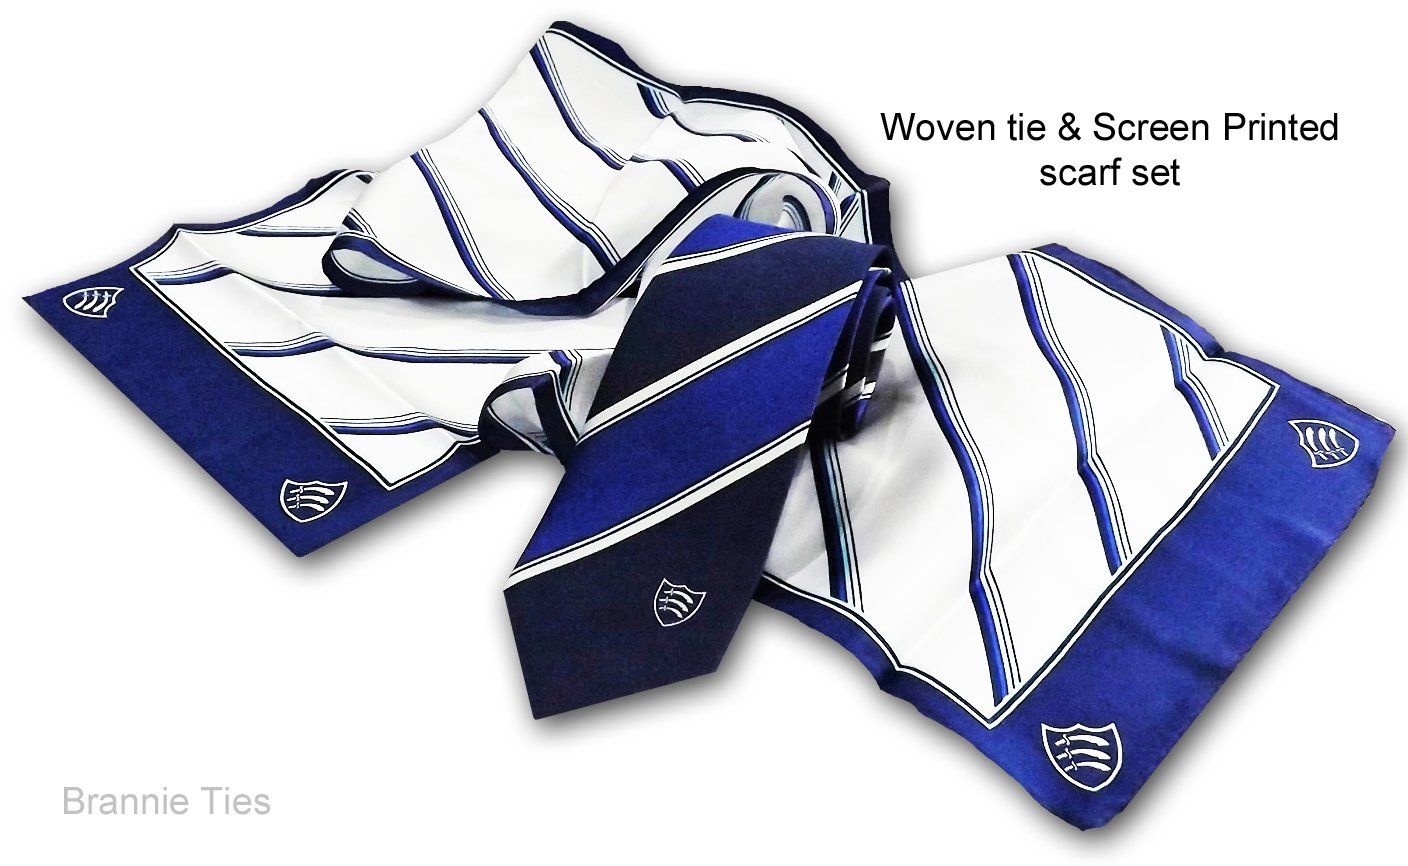 corporate ties and scarves